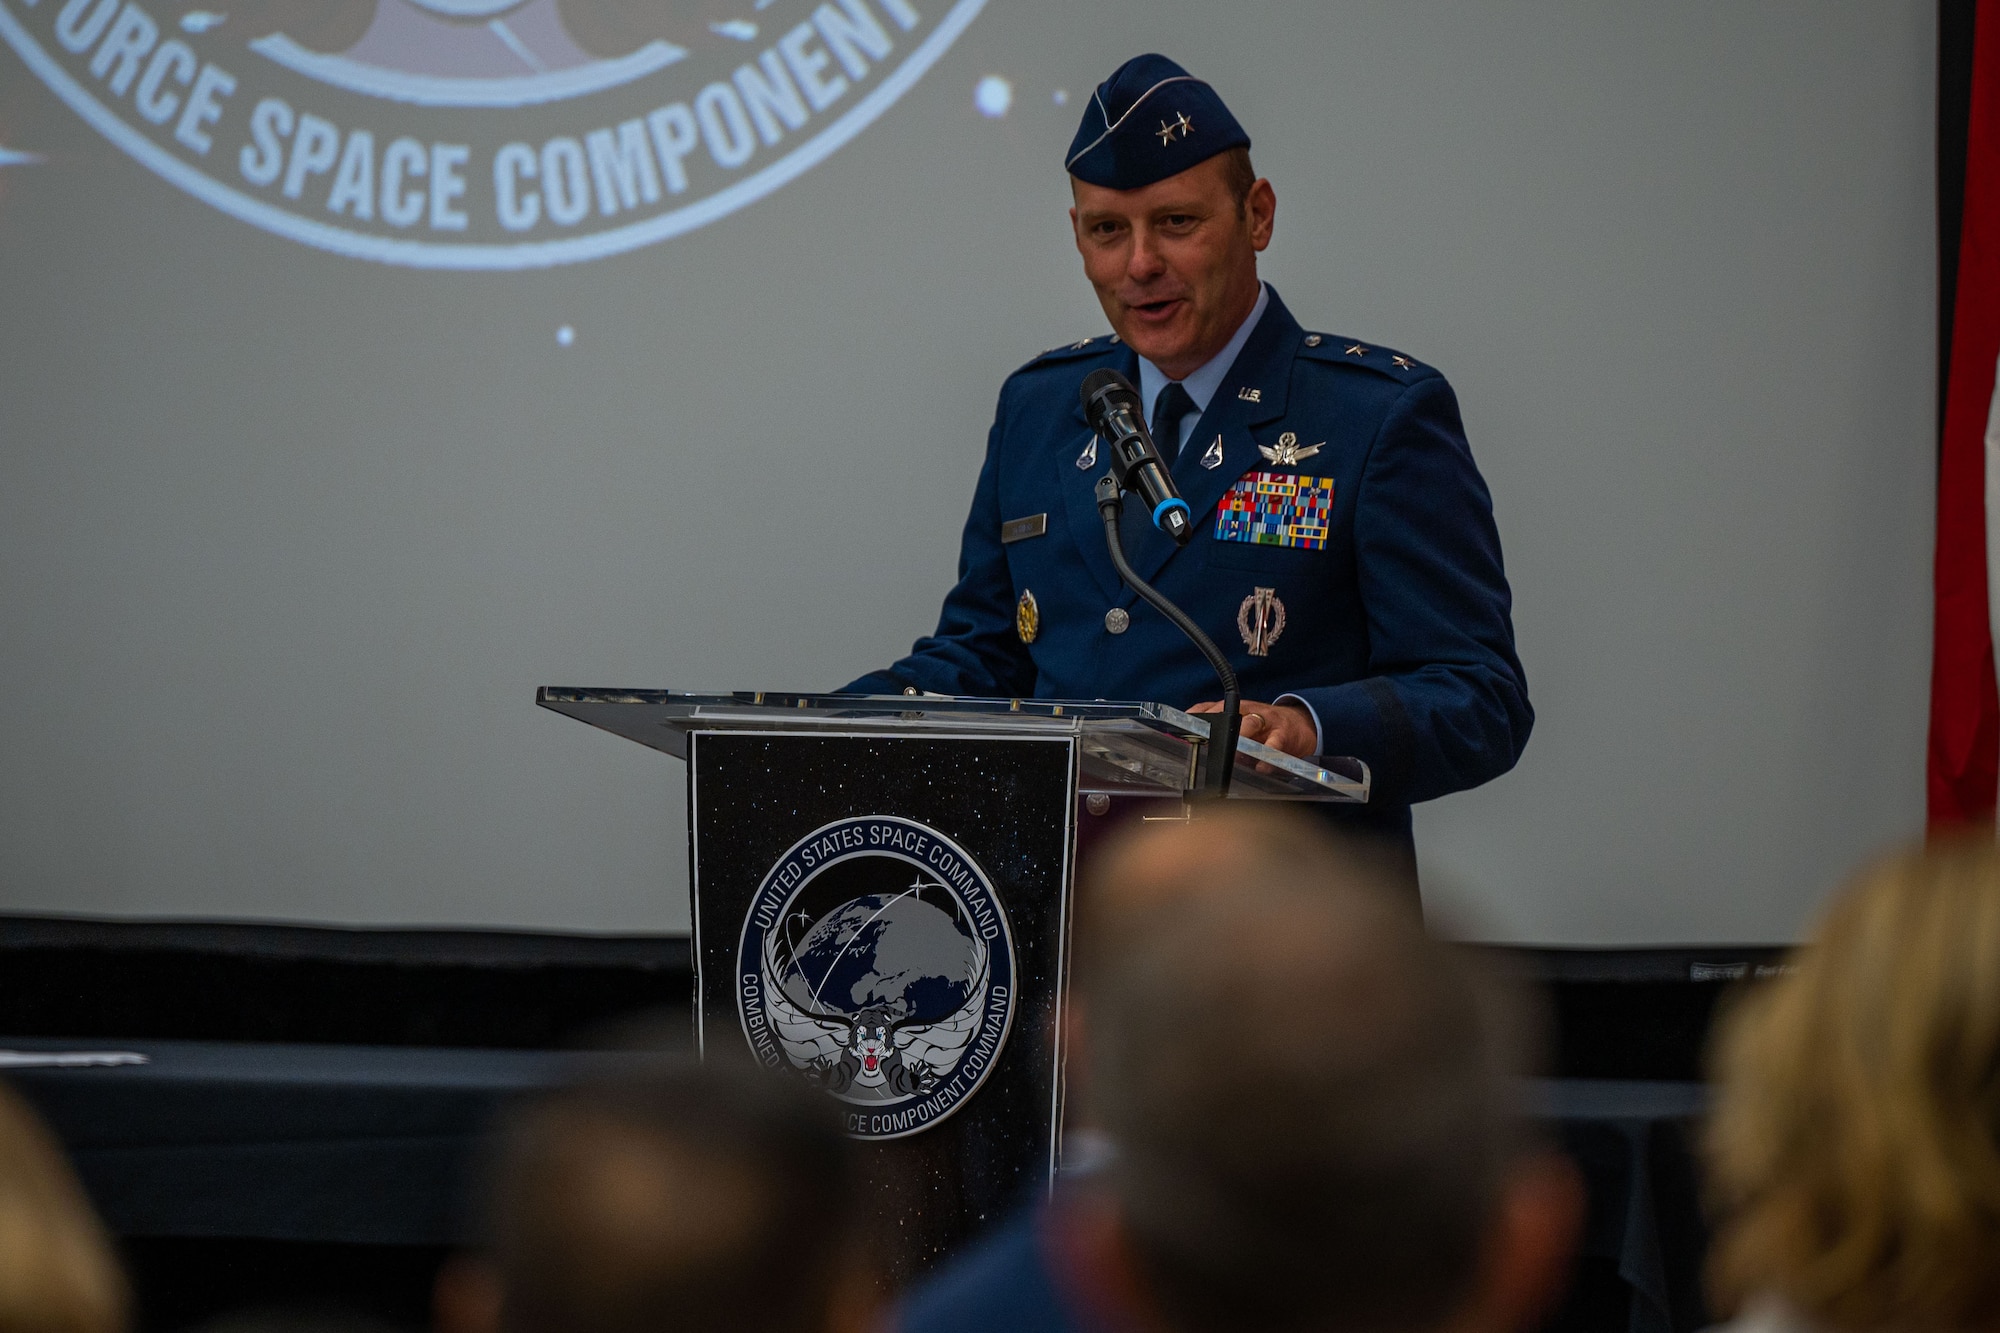 U.S. Space Force Maj. Gen. Douglas A. Schiess, newly appointed Combined Force Space Component Command commander, makes his first remarks as the unit’s commander during the CFSCC change of command ceremony at Vandenberg Space Force Base, Calif., Aug. 22, 2022. Prior to assuming command of CFSCC, Schiess was the Deputy Commanding General, Operations at Headquarters Space Operations Command at Peterson Space Force Base, Colo. (U.S. Space Force photo by Tech. Sgt. Luke Kitterman)